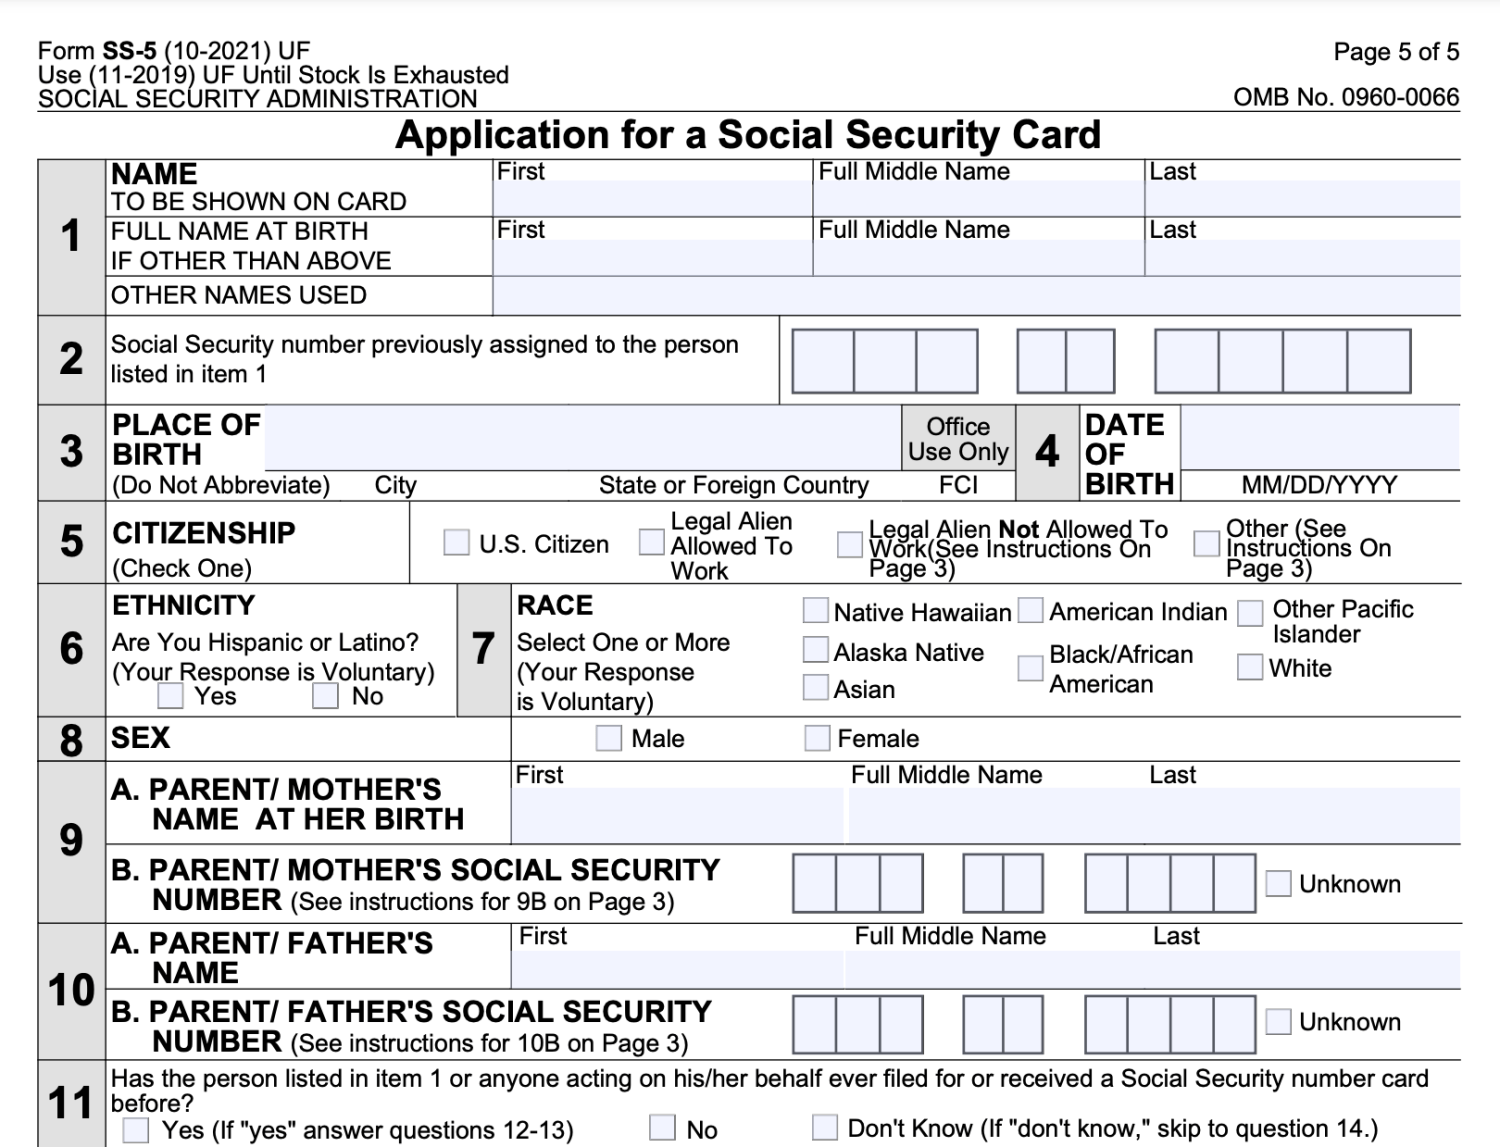 Social Security Number, Explained - Boundless